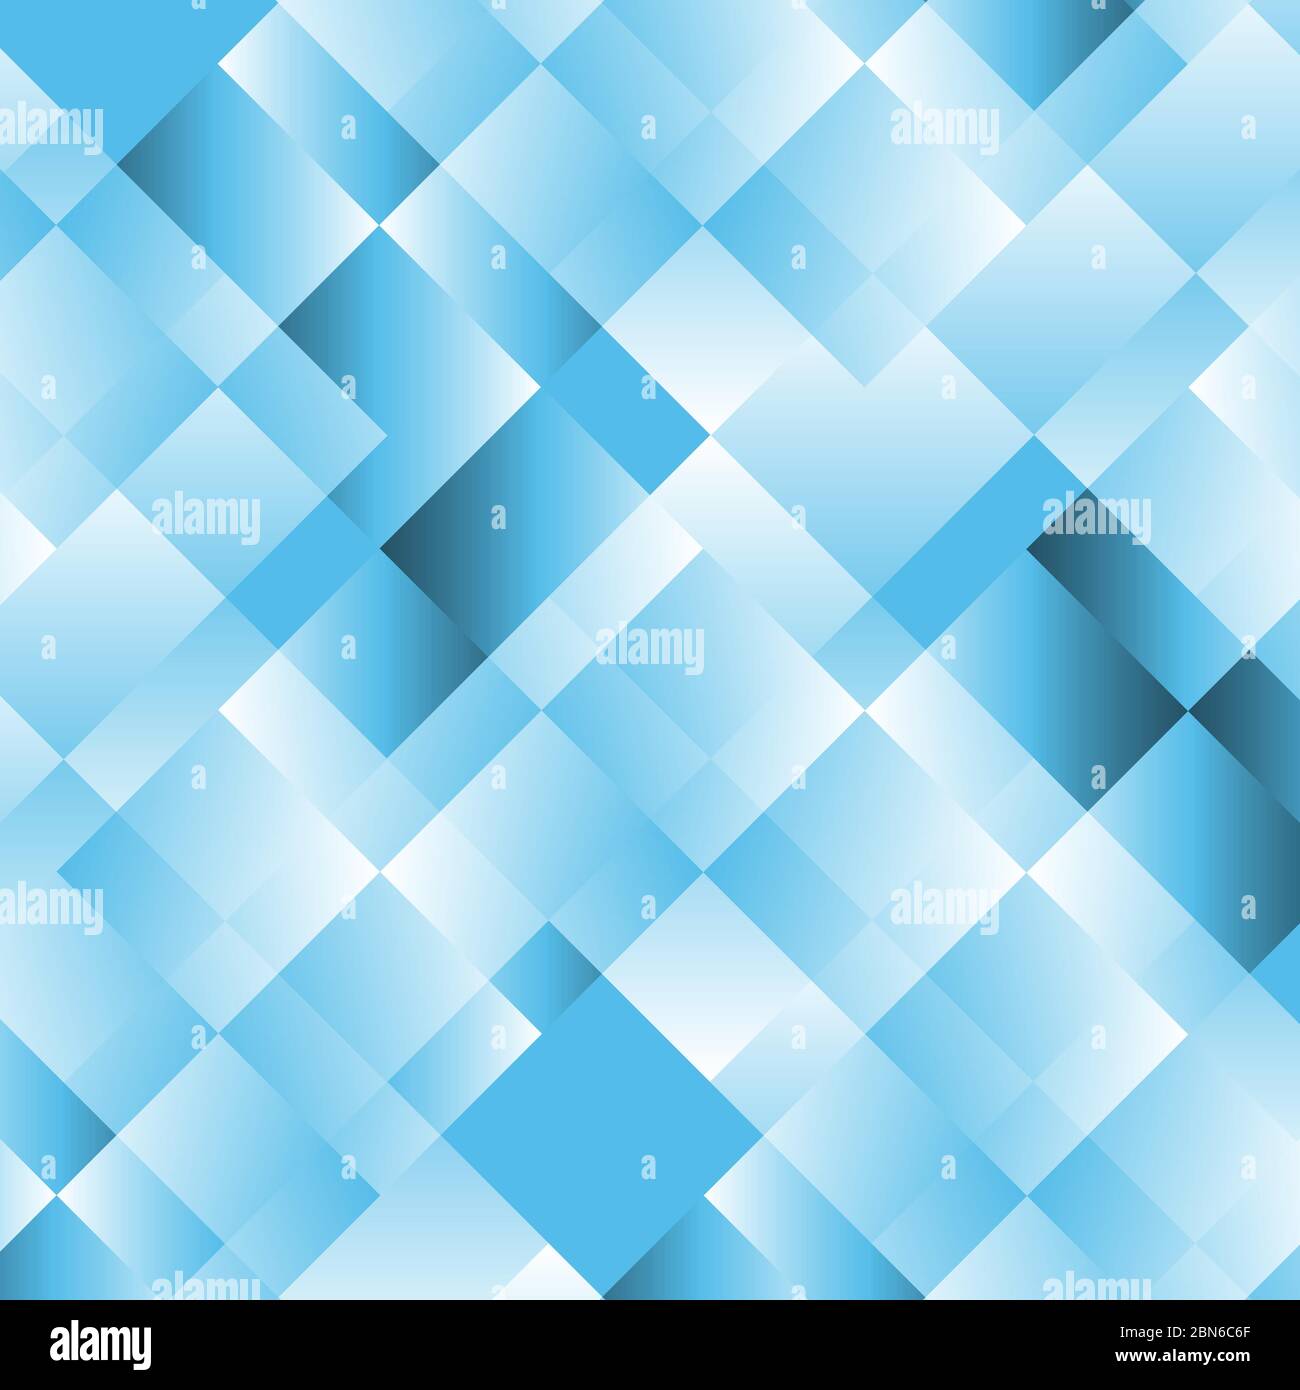 Abstract light blue paper background with bright Vector Image